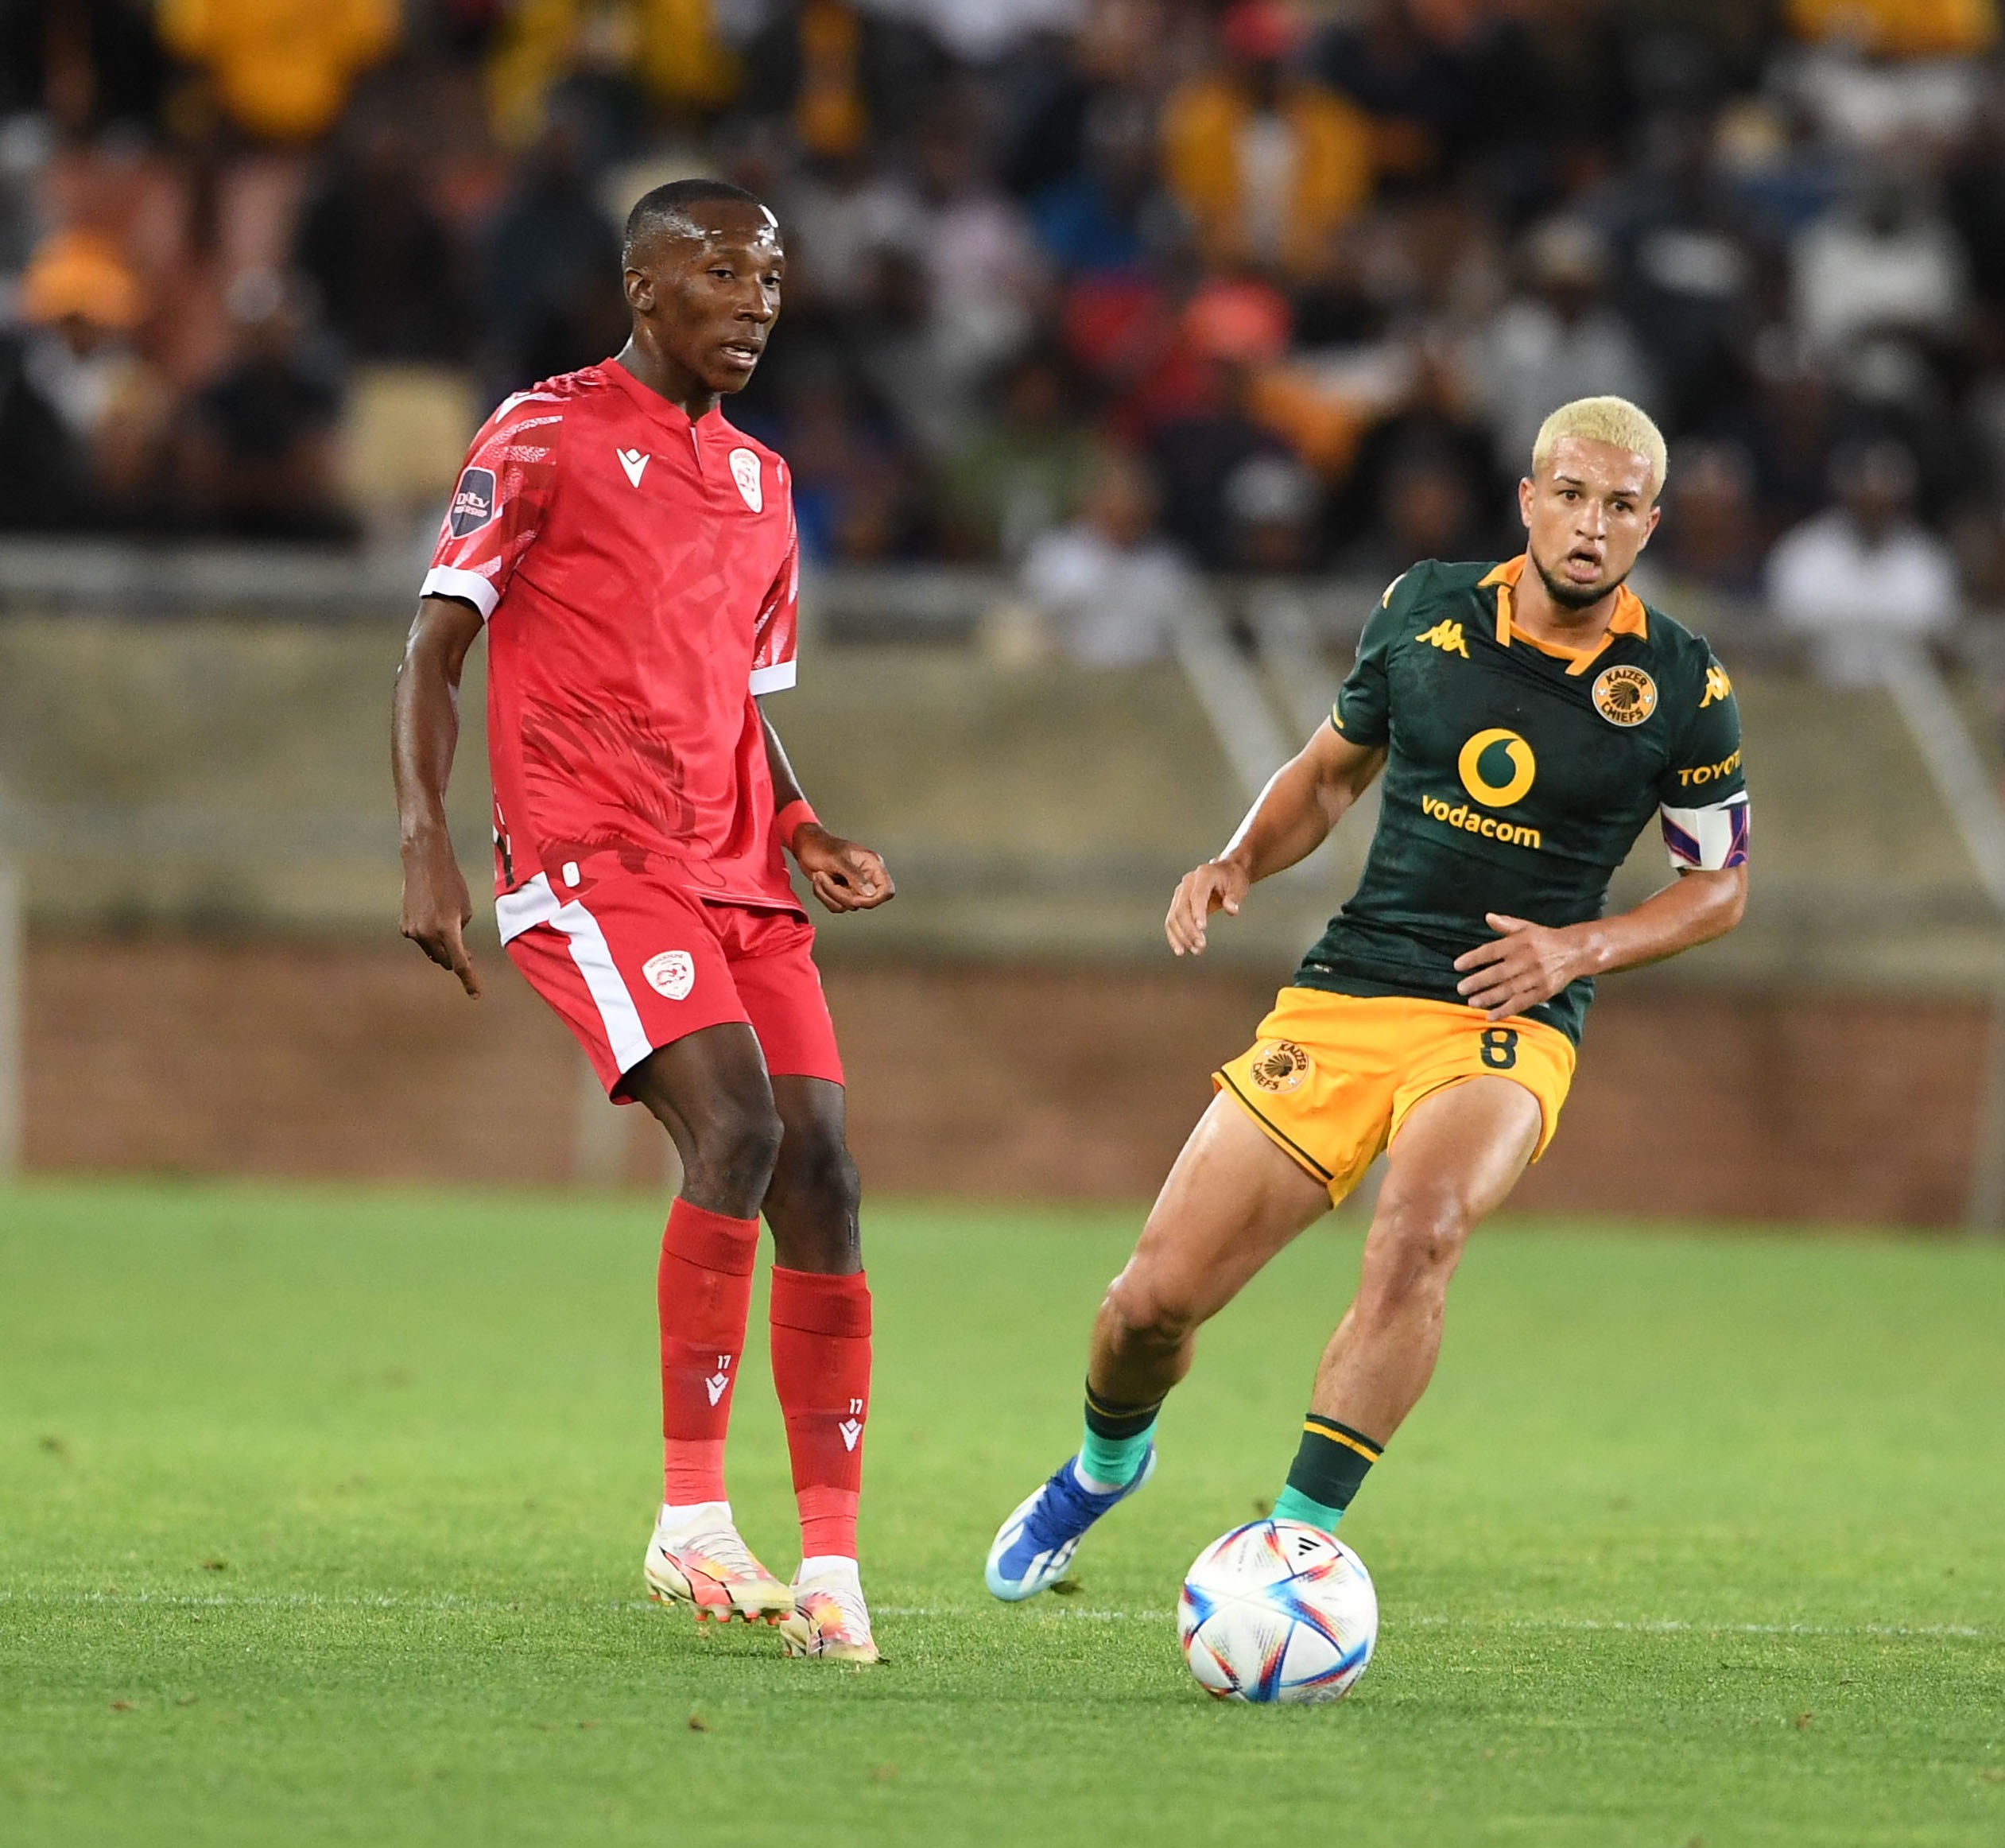 Mokwana tipped to follow in footsteps of Maart